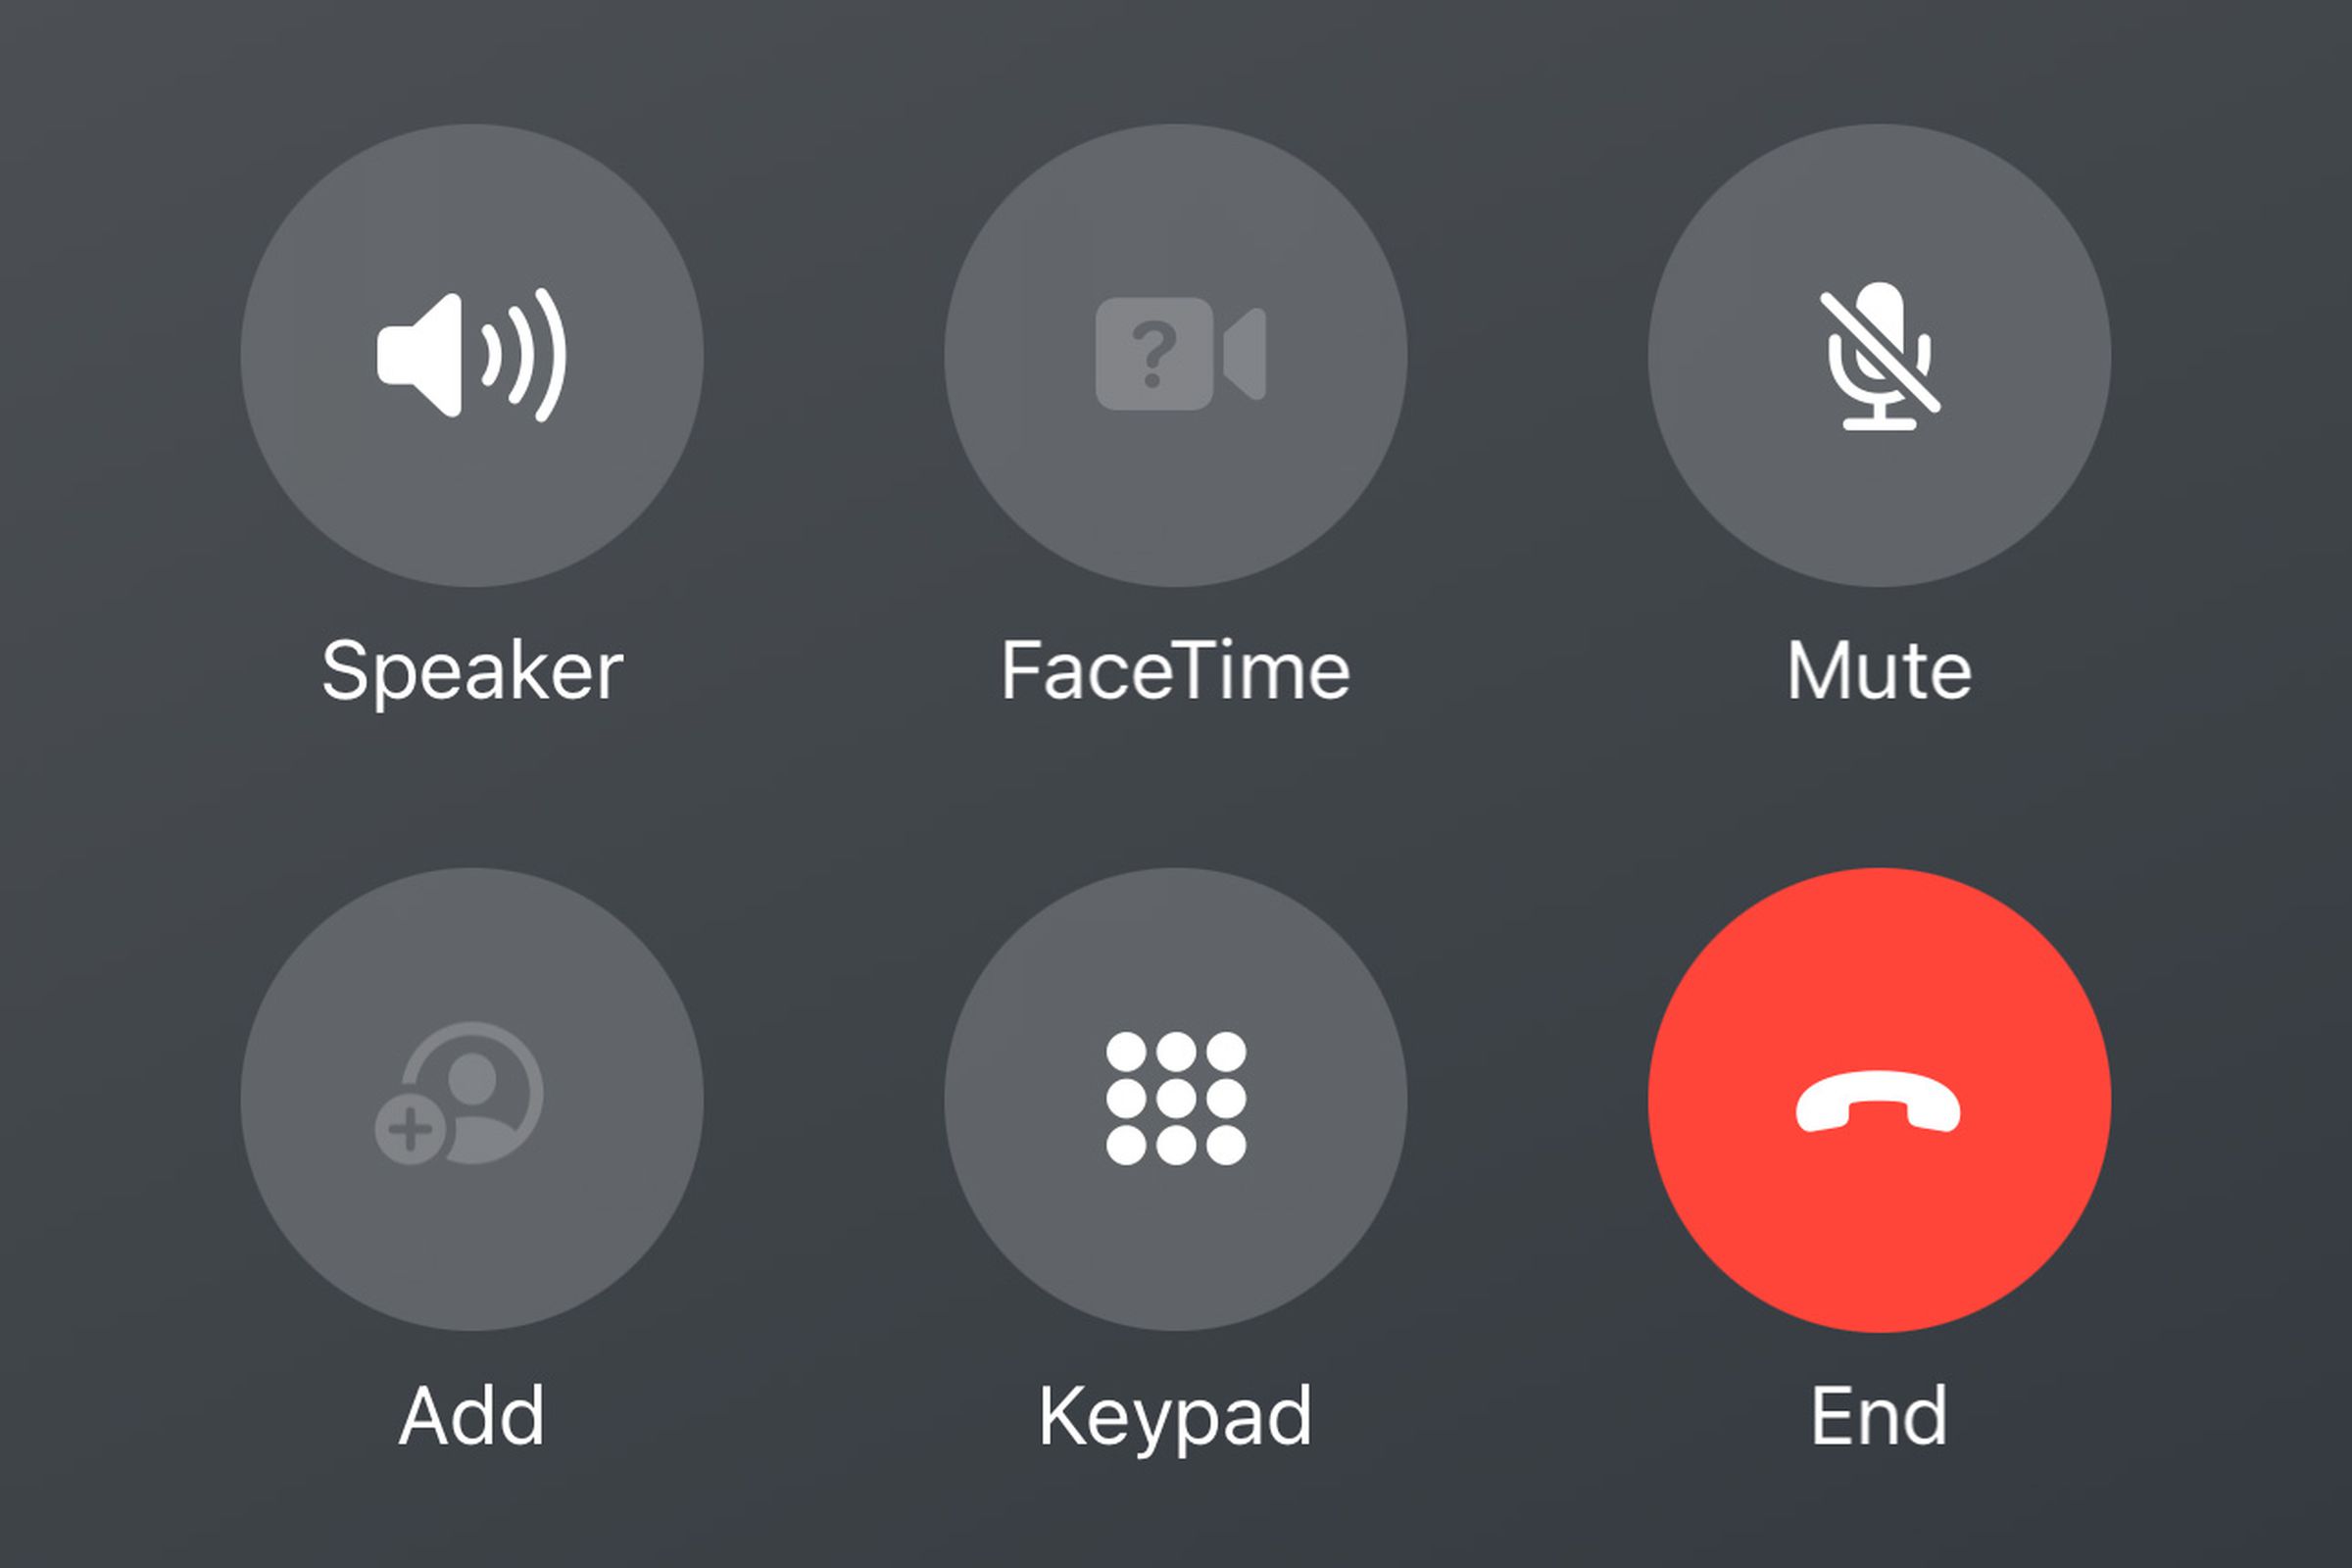 A screenshot of the phone call interface from iOS 17.